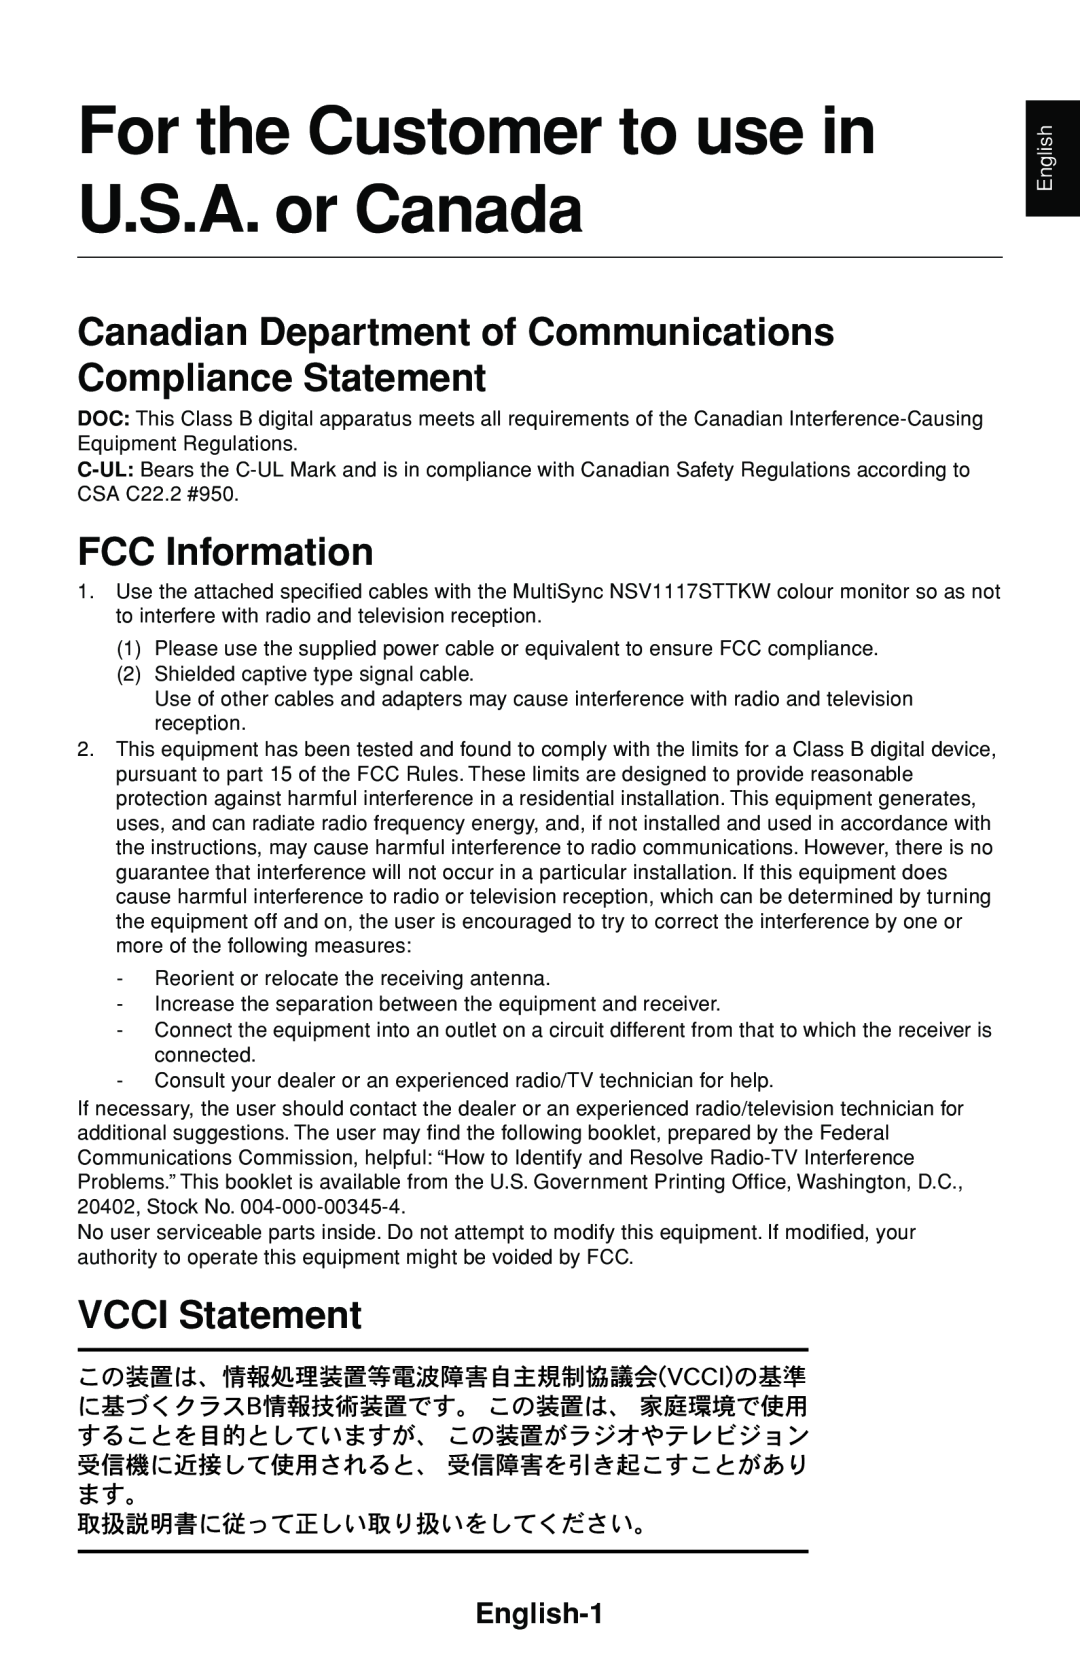 NEC FE1250+ user manual For the Customer to use in U.S.A. or Canada, FCC Information, VCCI Statement, English-1 